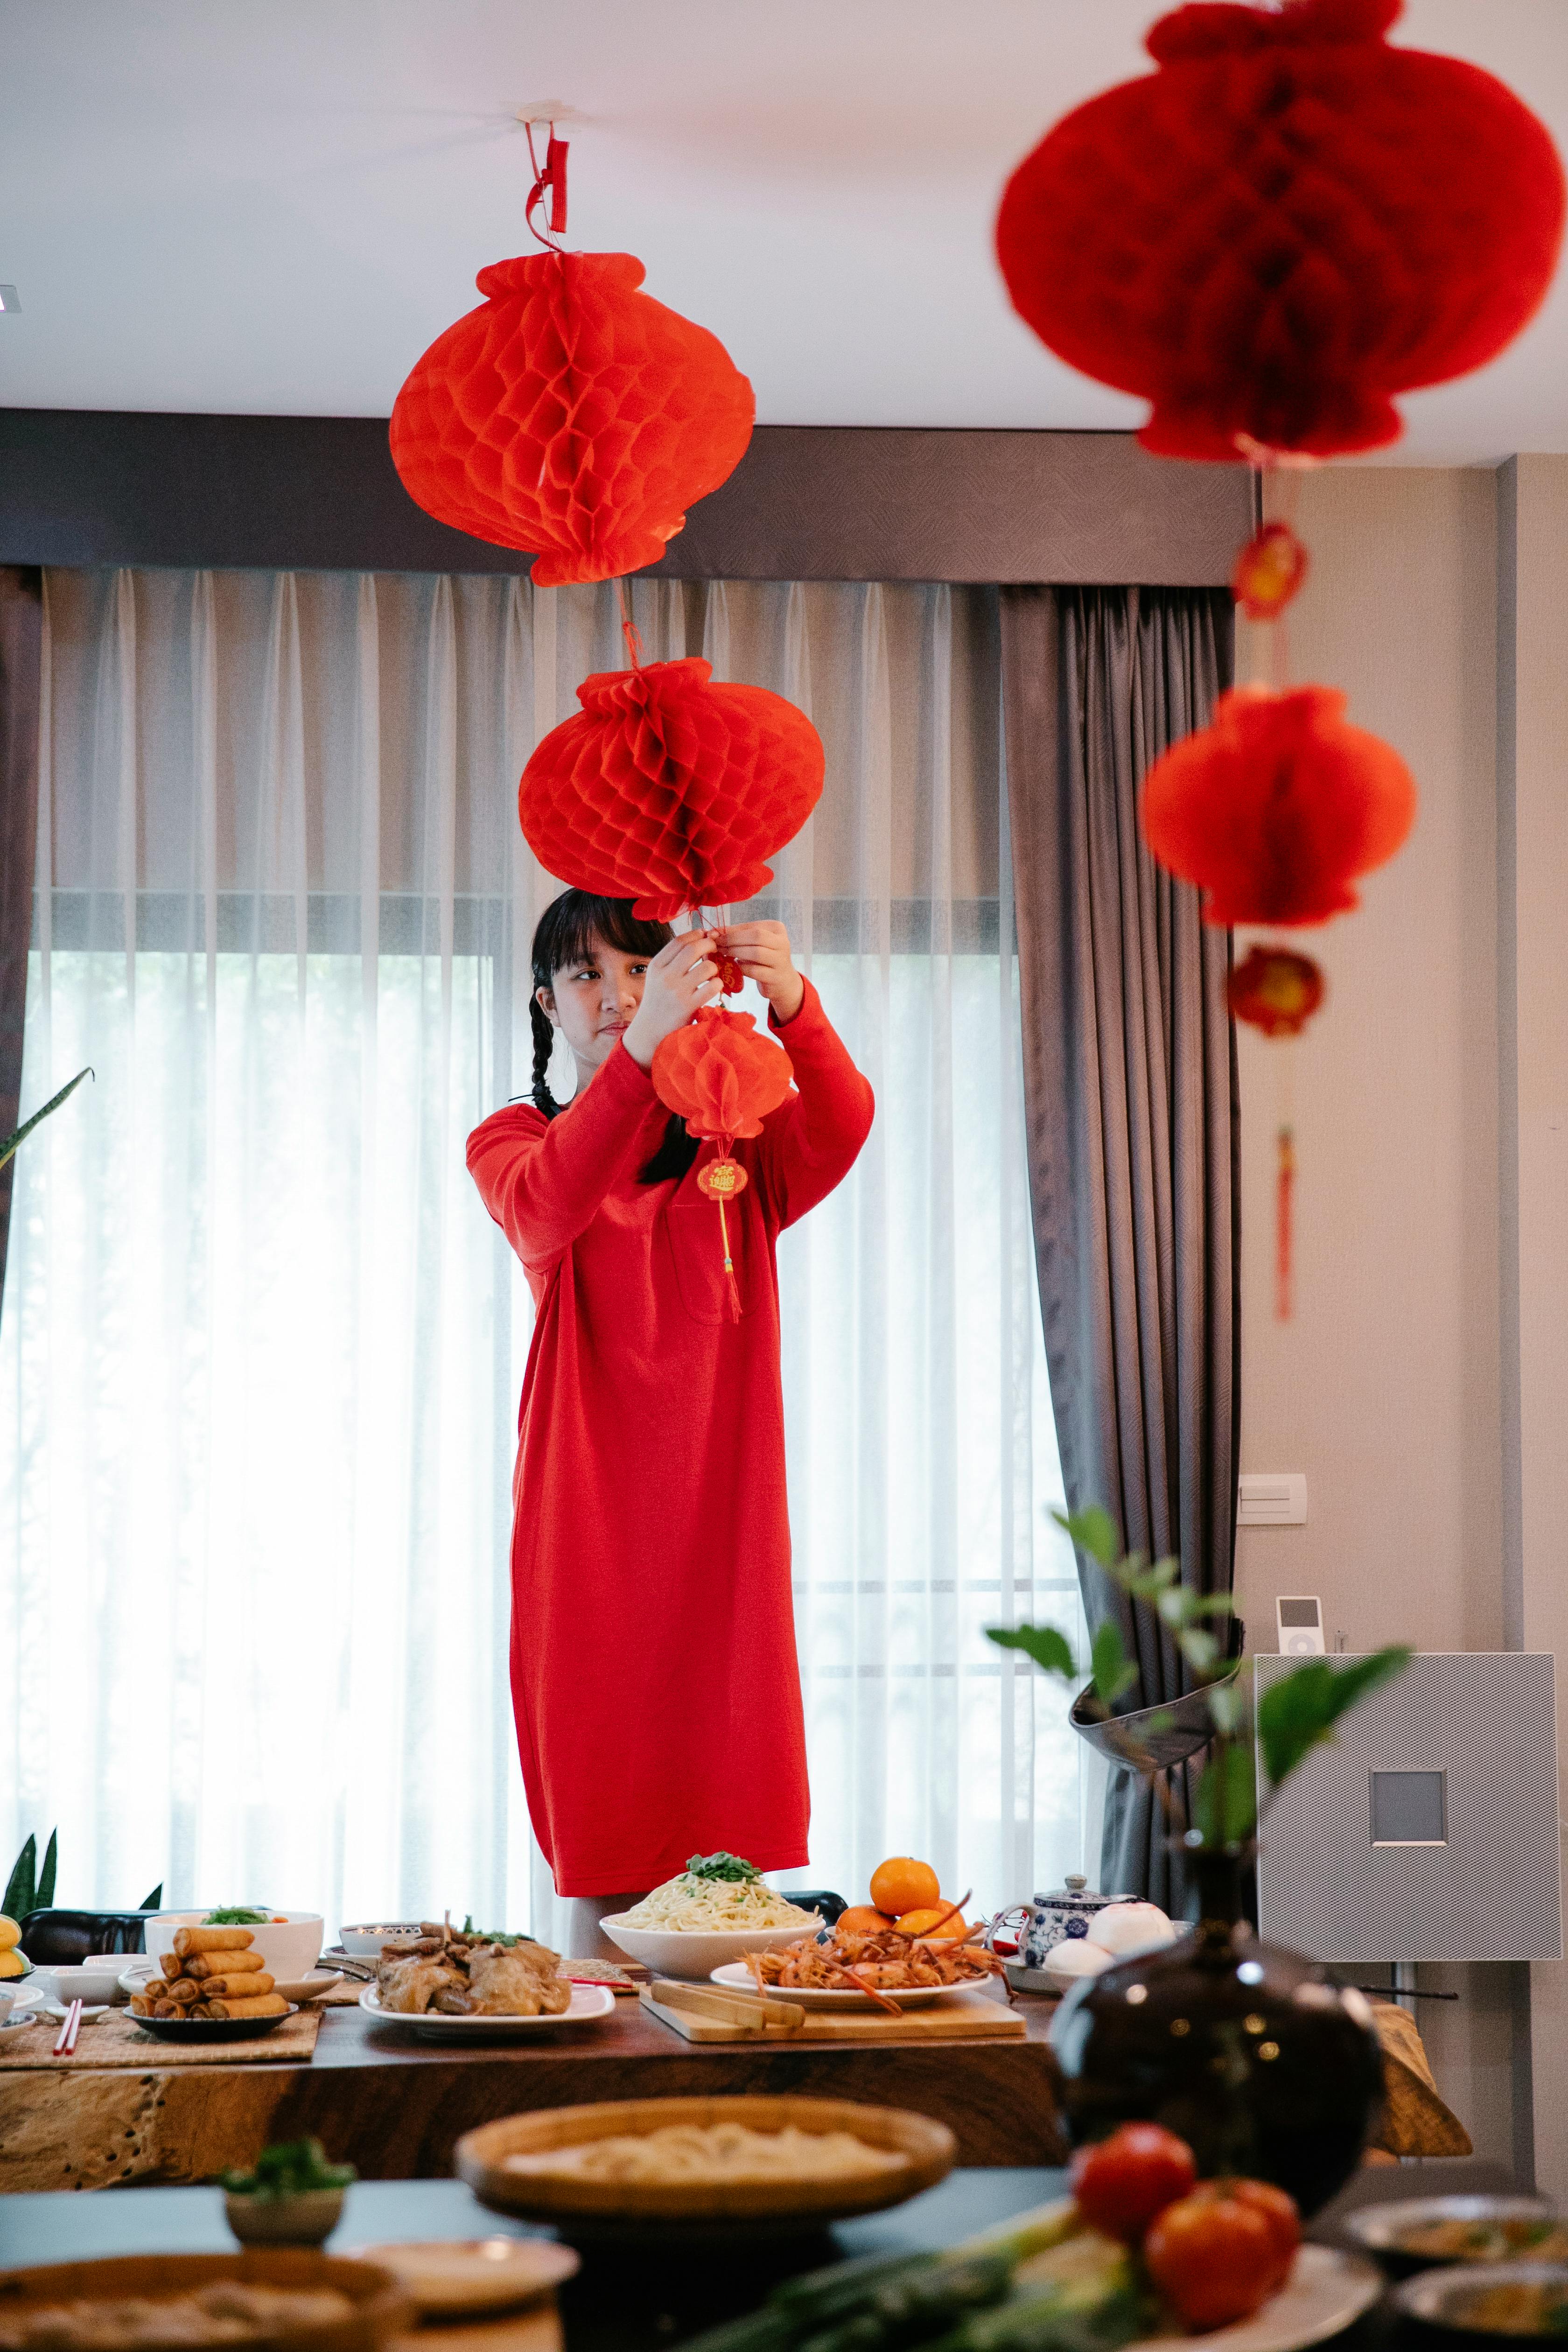 asian teen decorating home with red lanterns during festive occasion